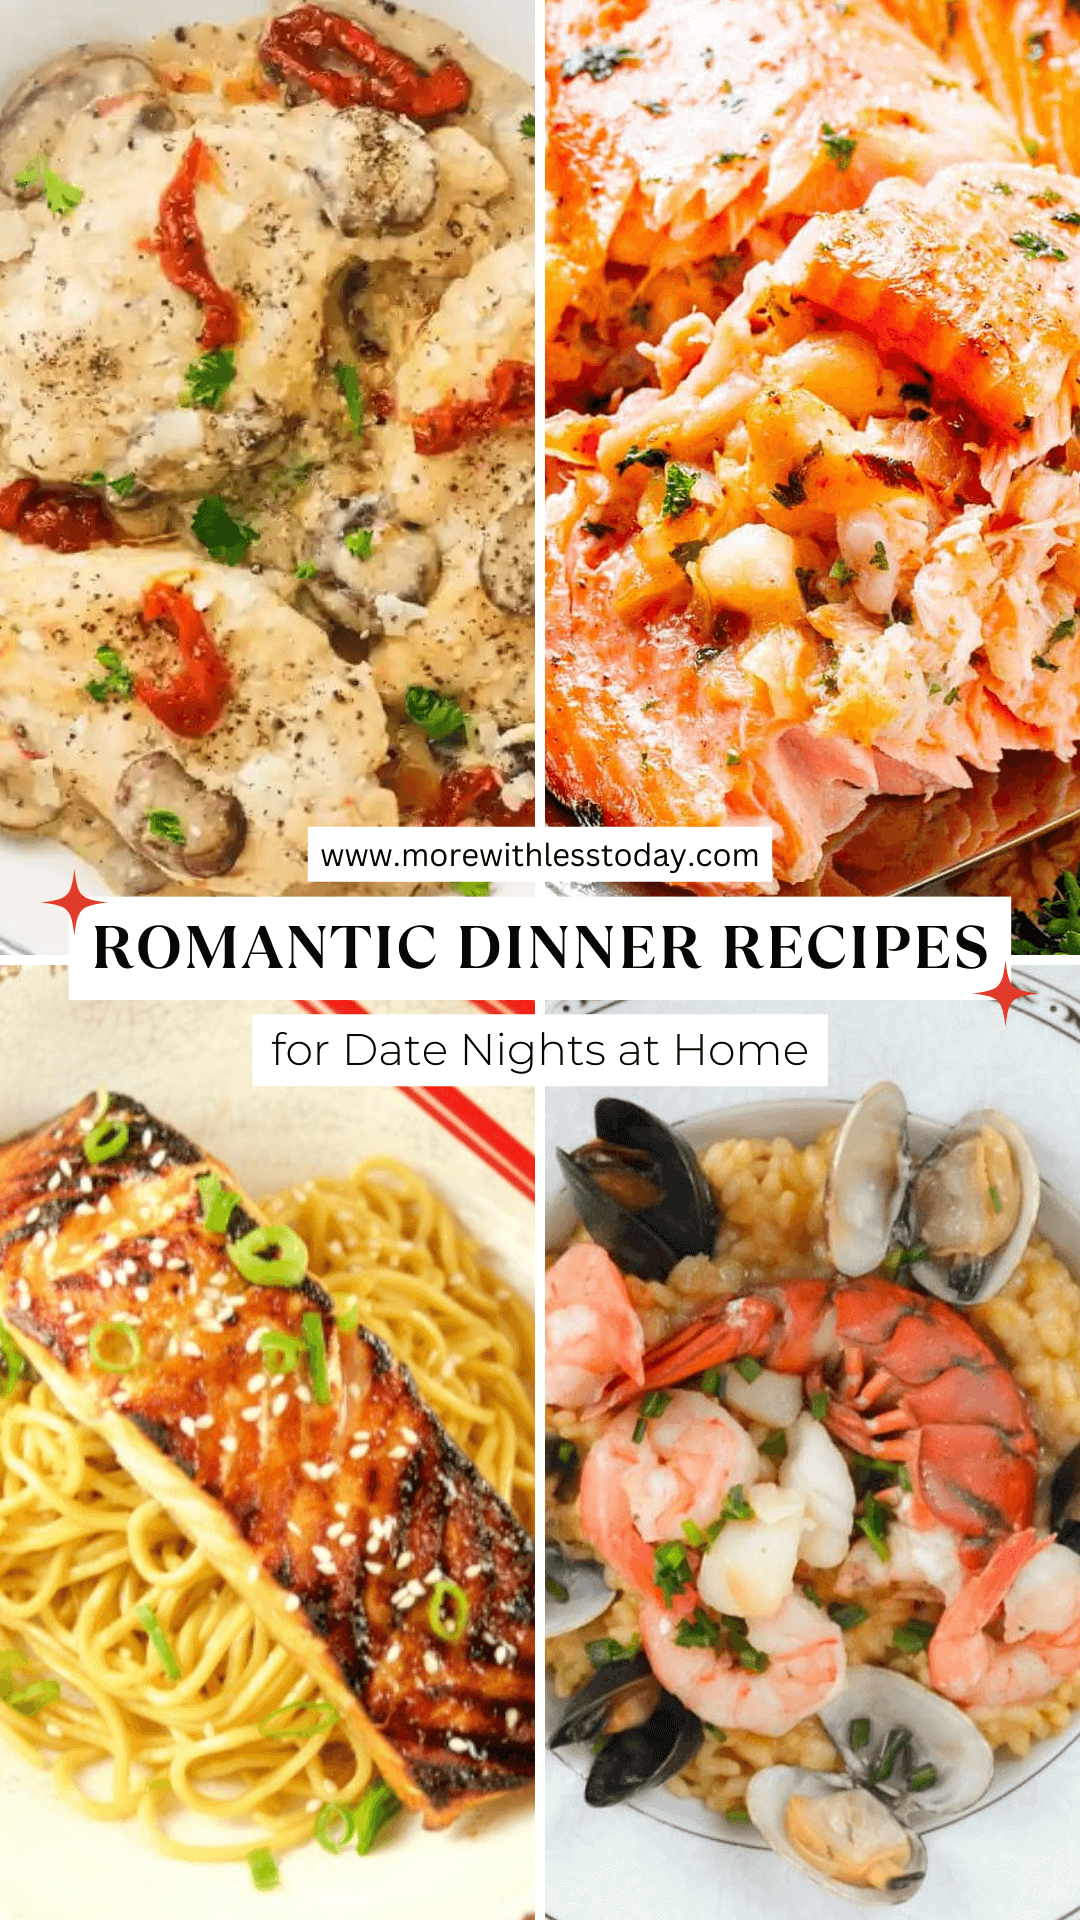 Delicious Romantic Dinner Recipes for Date Nights at Home - PIN